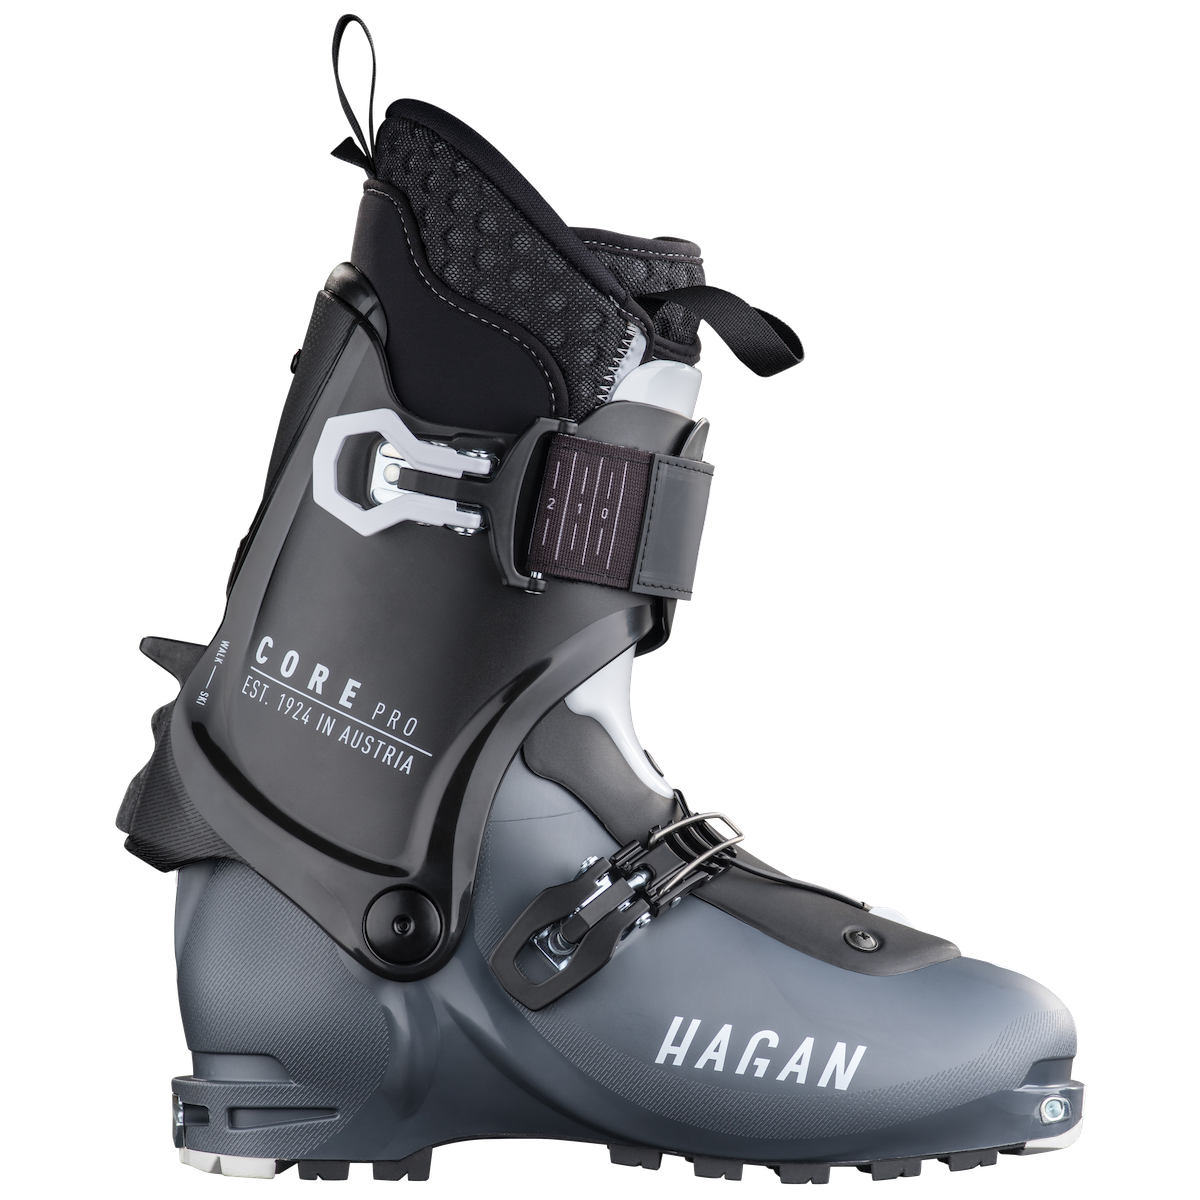 Hagan Core Pro alpine touring backcountry skiing boot for ski mountaineering